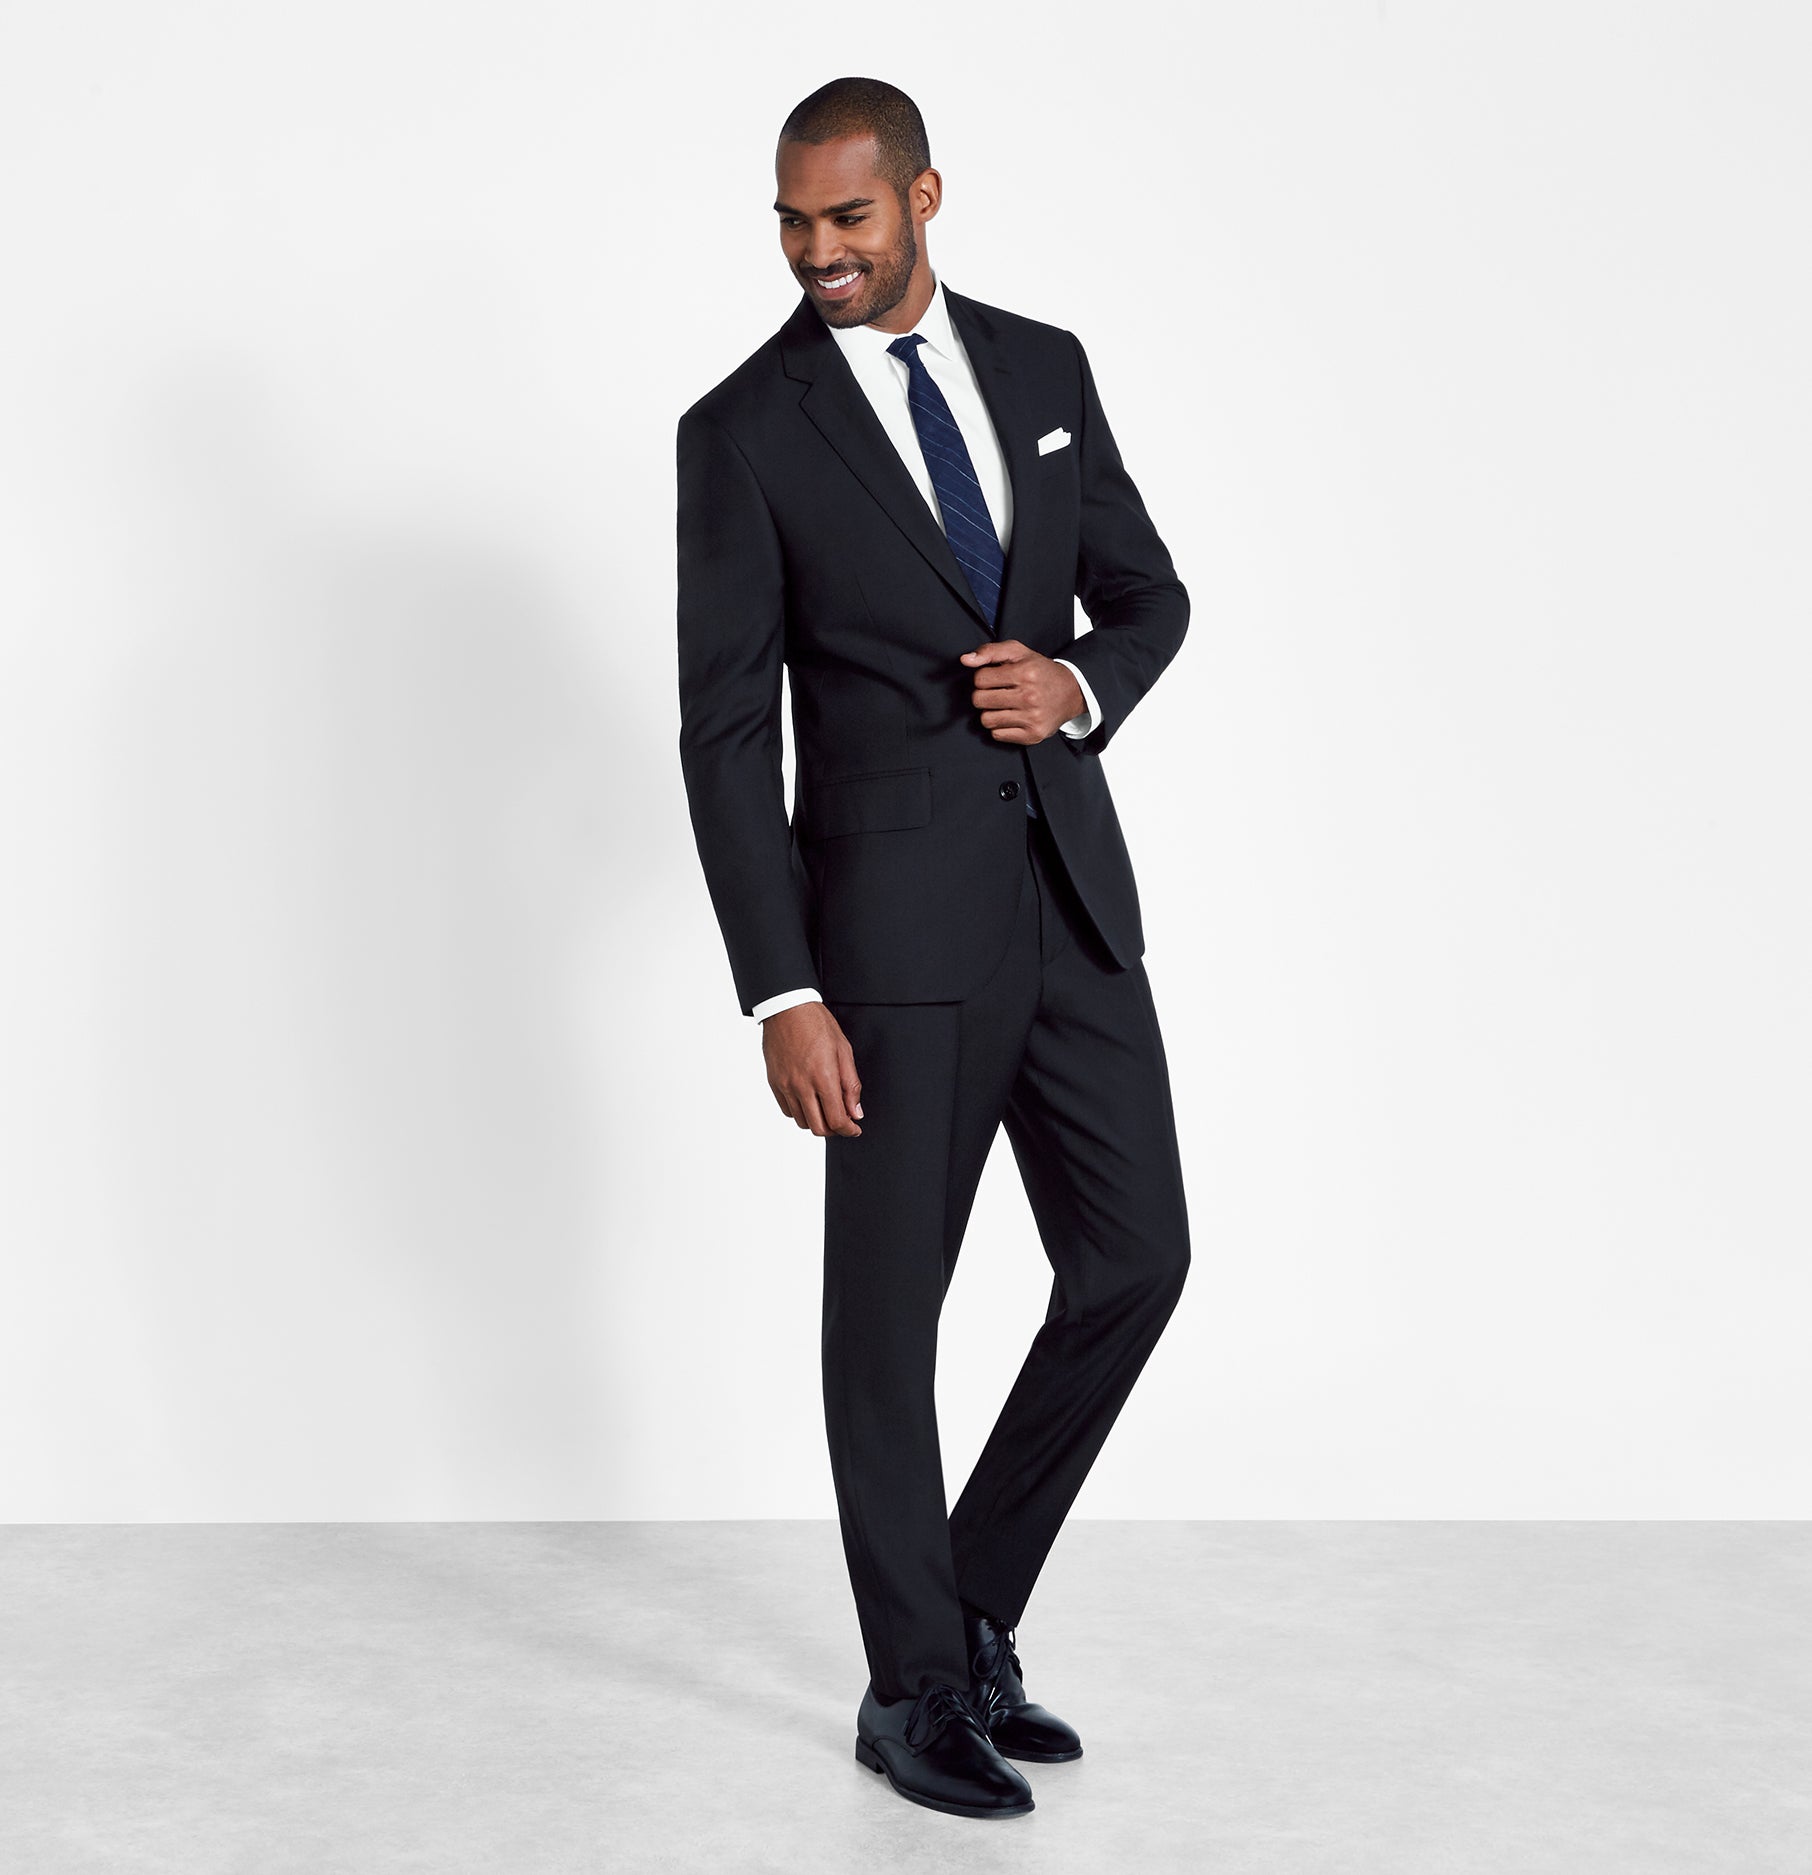 https://static.theblacktux.com/products/outfits/the-marlowe-outfit/02_161129_TBT_Ecom_Black_Suit_1_1664_w1_1812x1875.jpg